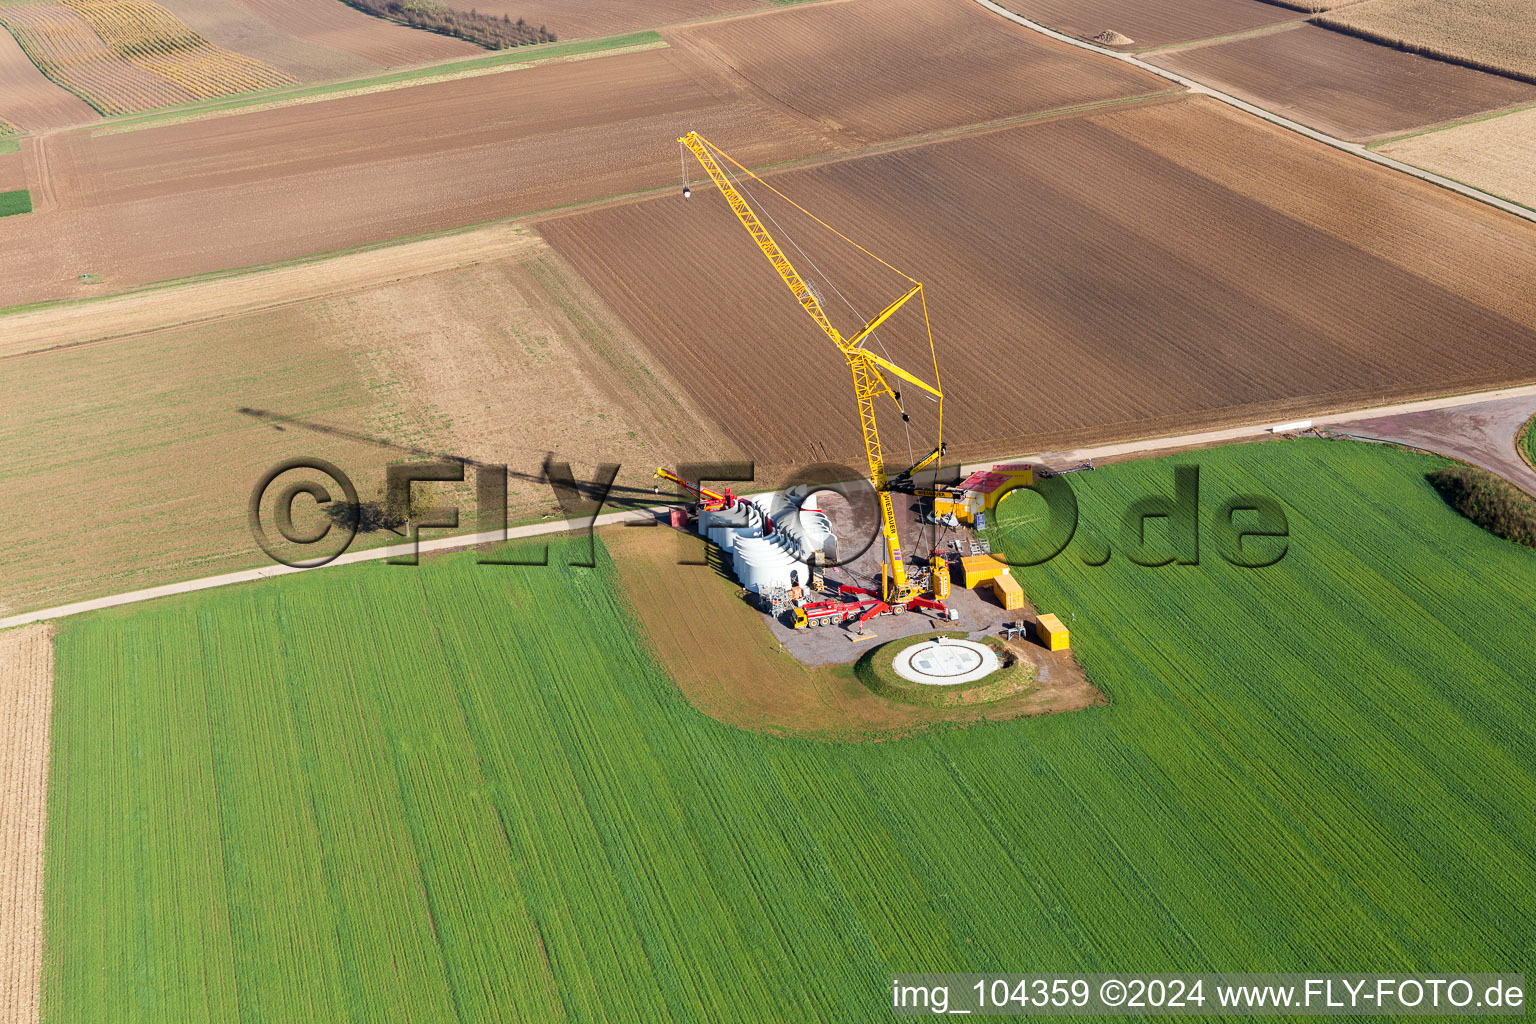 Construction site of the EnBW wind farm Freckenfeld - for a wind turbine with 6 wind turbines in Freckenfeld in the state Rhineland-Palatinate, Germany seen from above